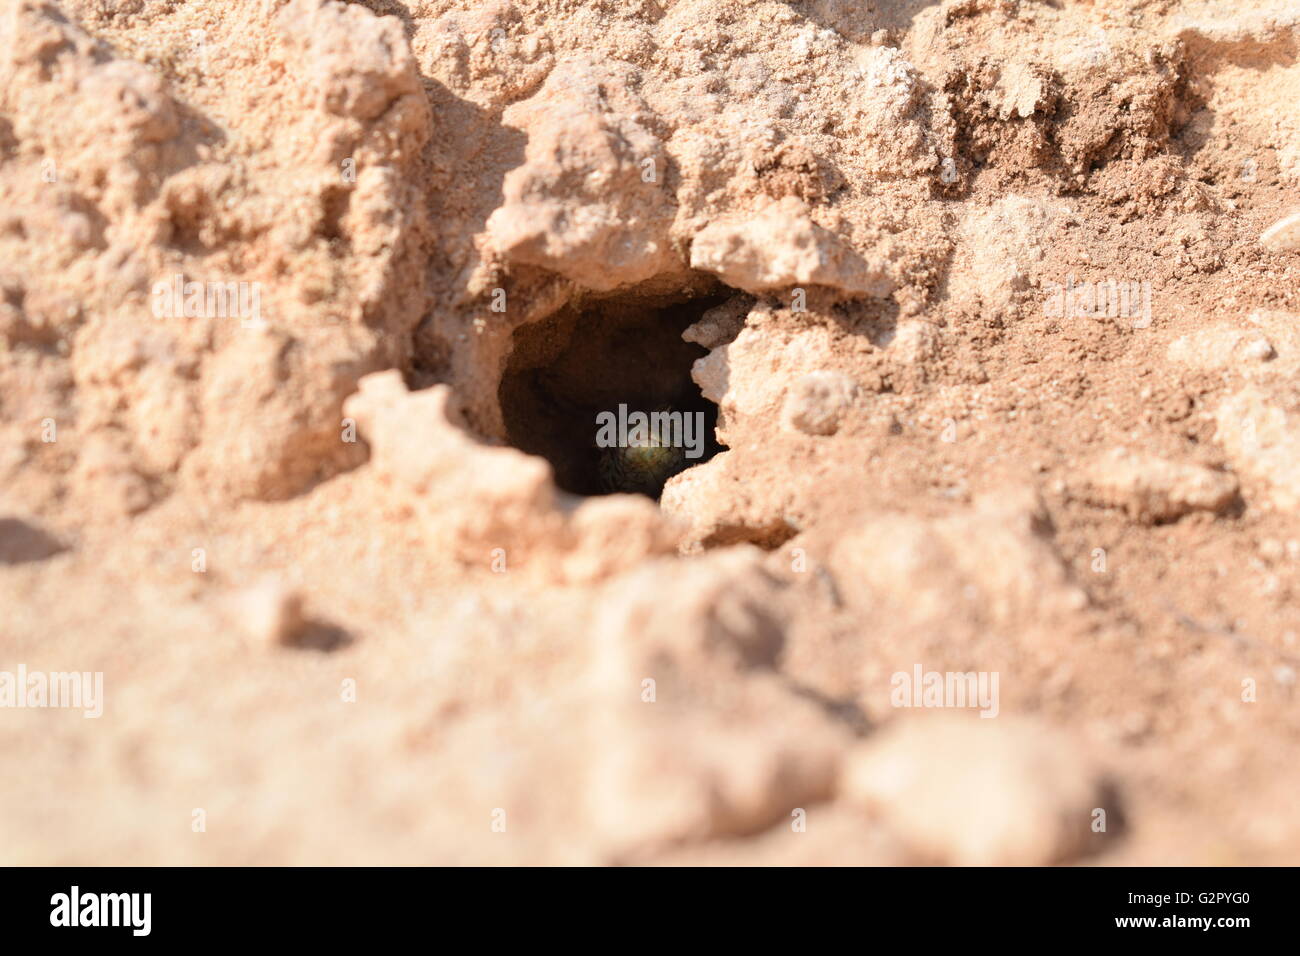 Looking down the nest of a hiding Podarcis Pityusensis Formenterae lizard Stock Photo